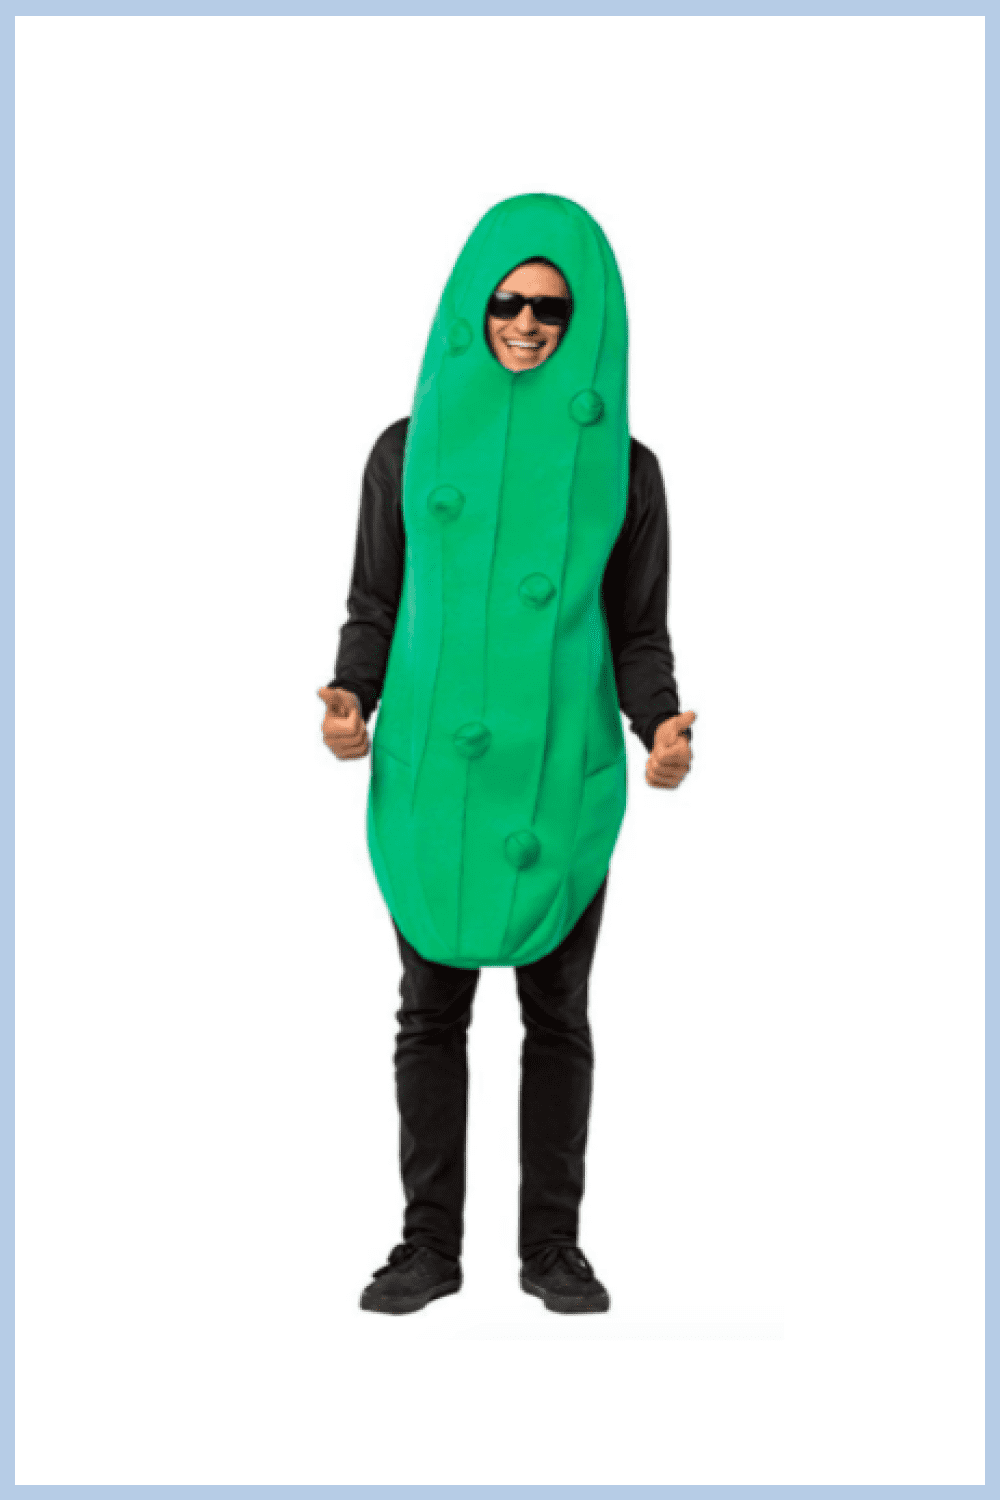 The green cucumber costume will surprise everyone.